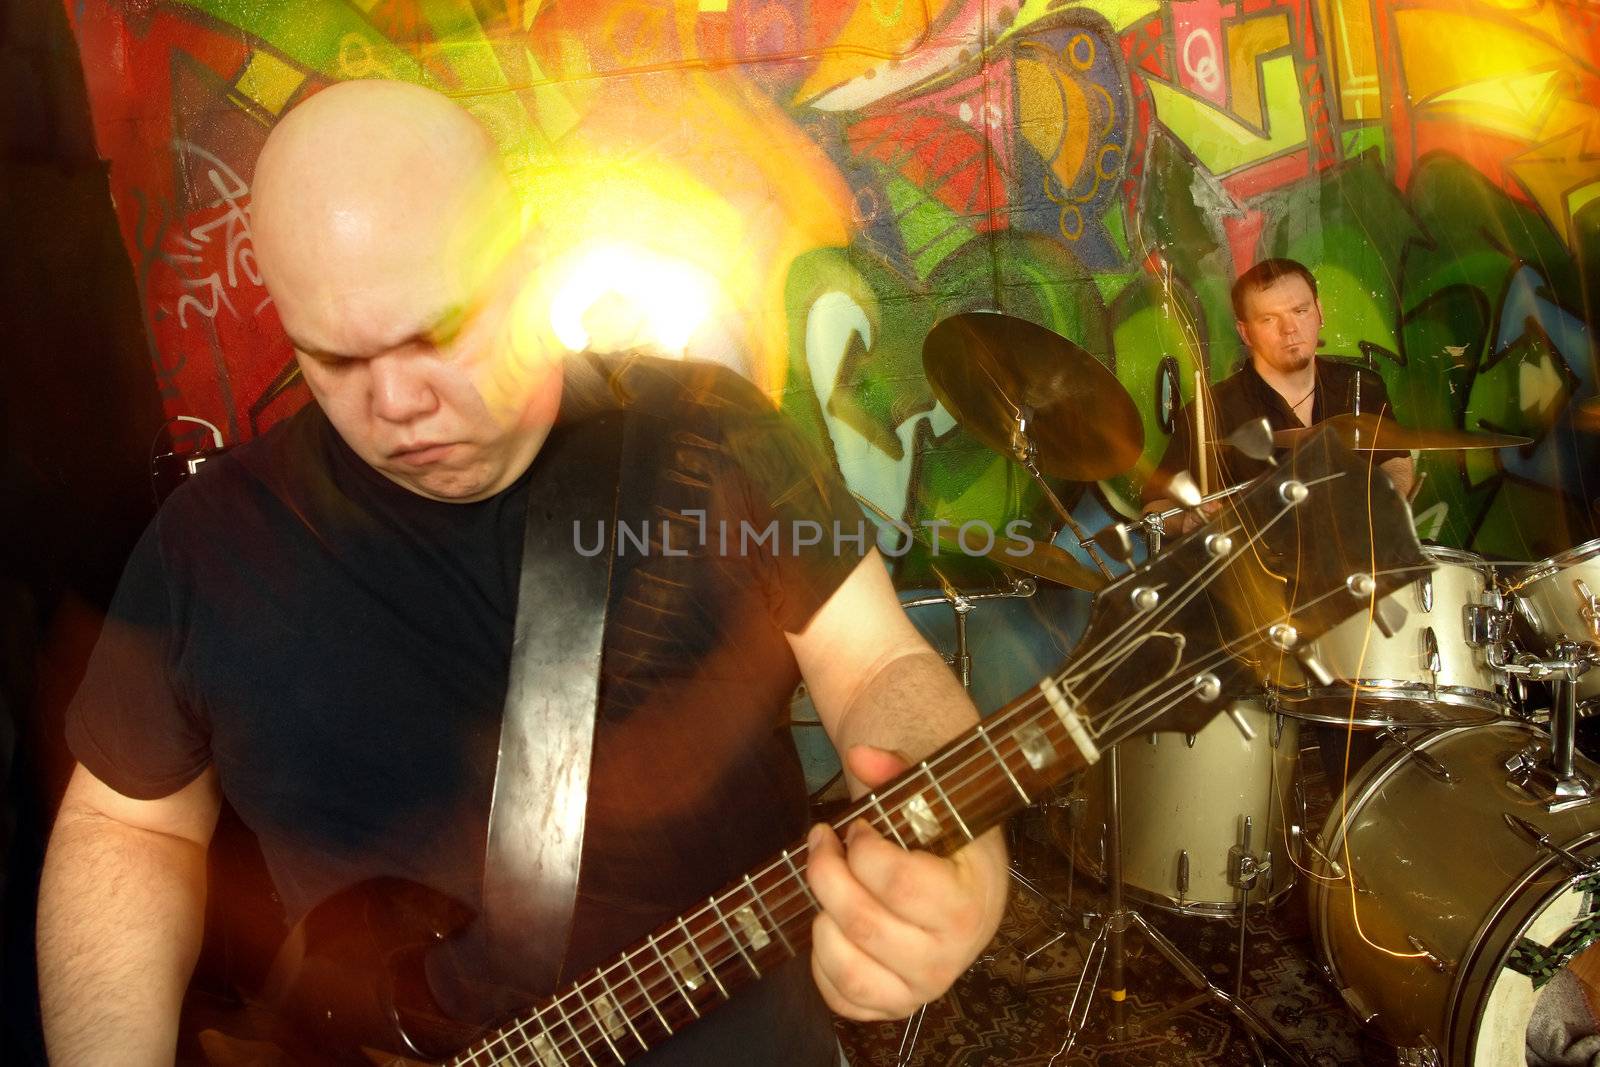 Heavy rock band playing. Shot with strobes and slow shutter speed to create lighting atmosphere and blur effects.  Slight movement visible on both players.
